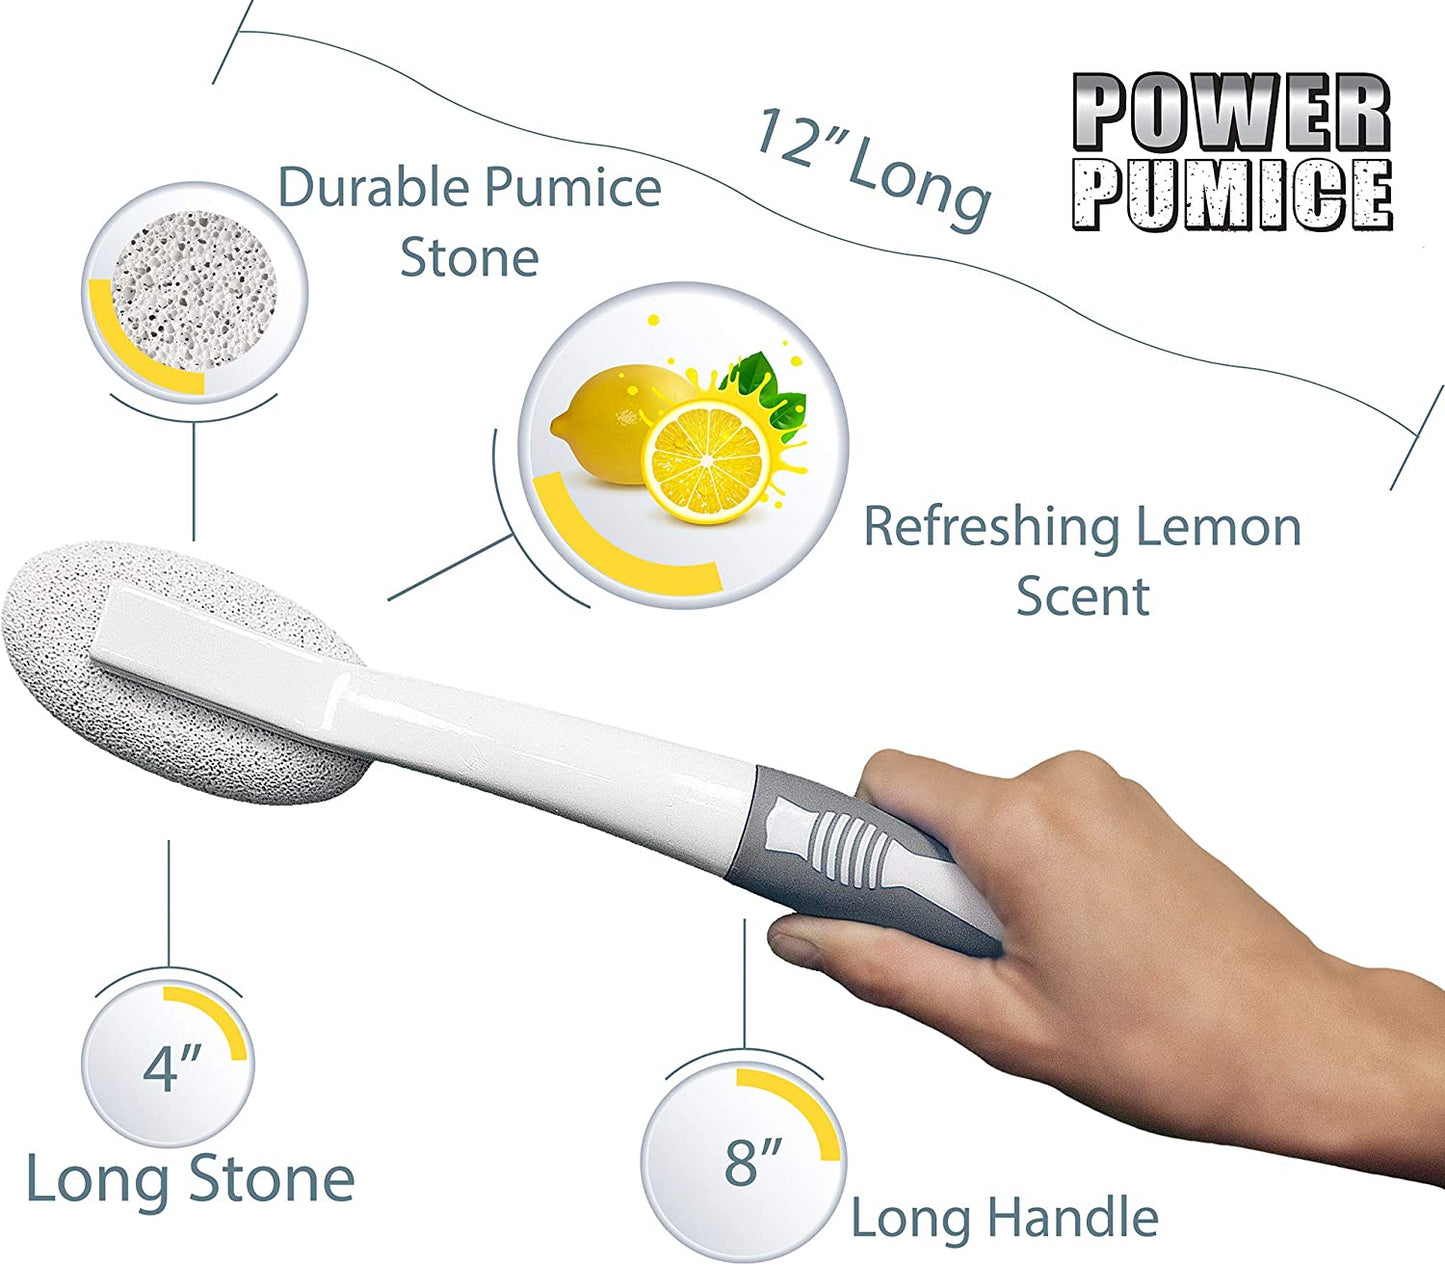 Molly's Marvelous Power Pumice Lemon Scented